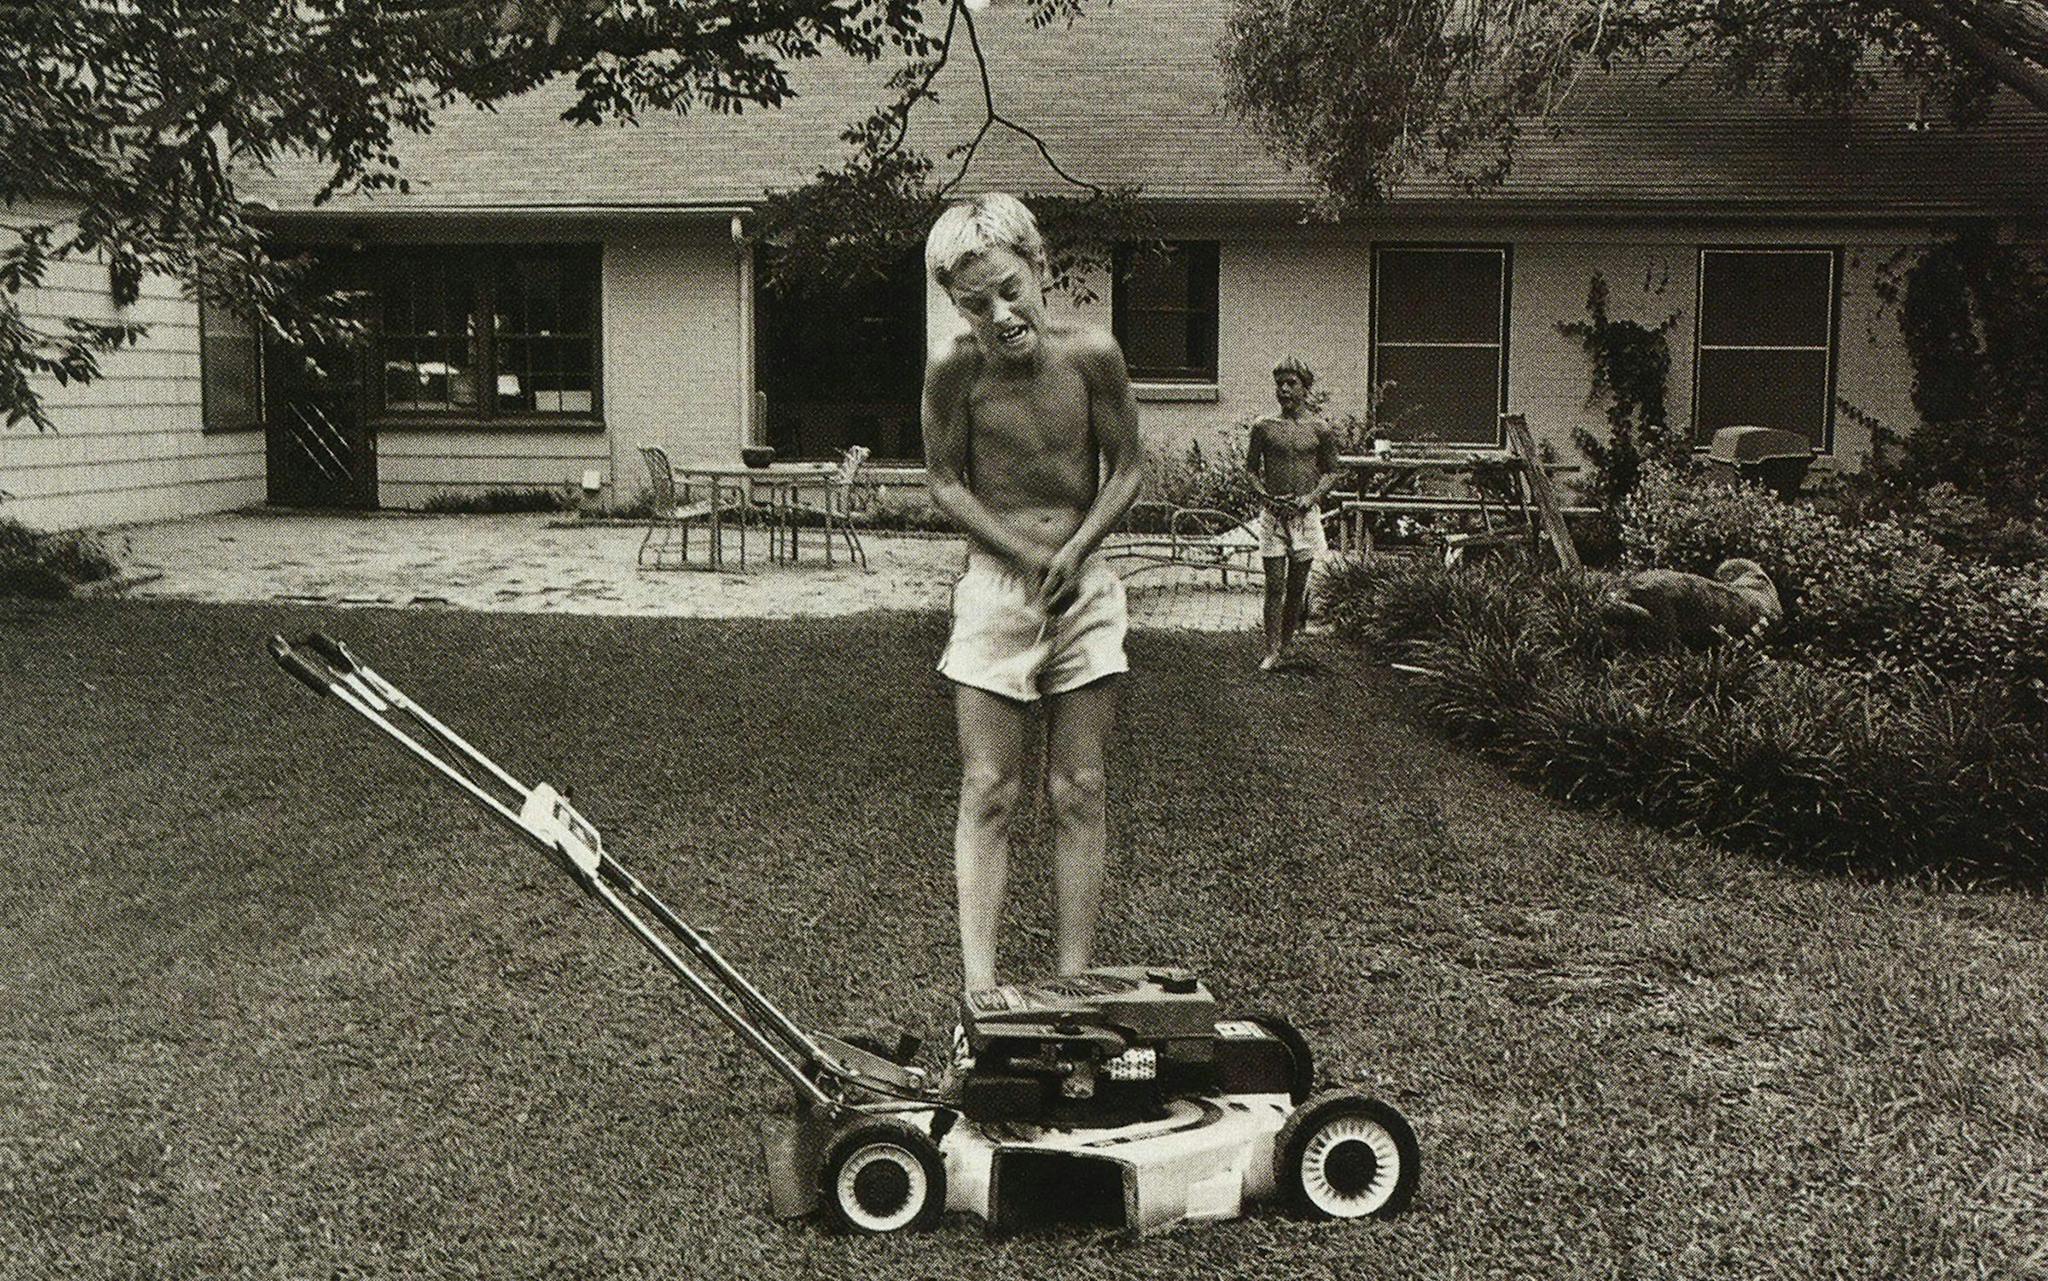 Owen and Luke Wilson stand behind a lawn mower in their front yard.